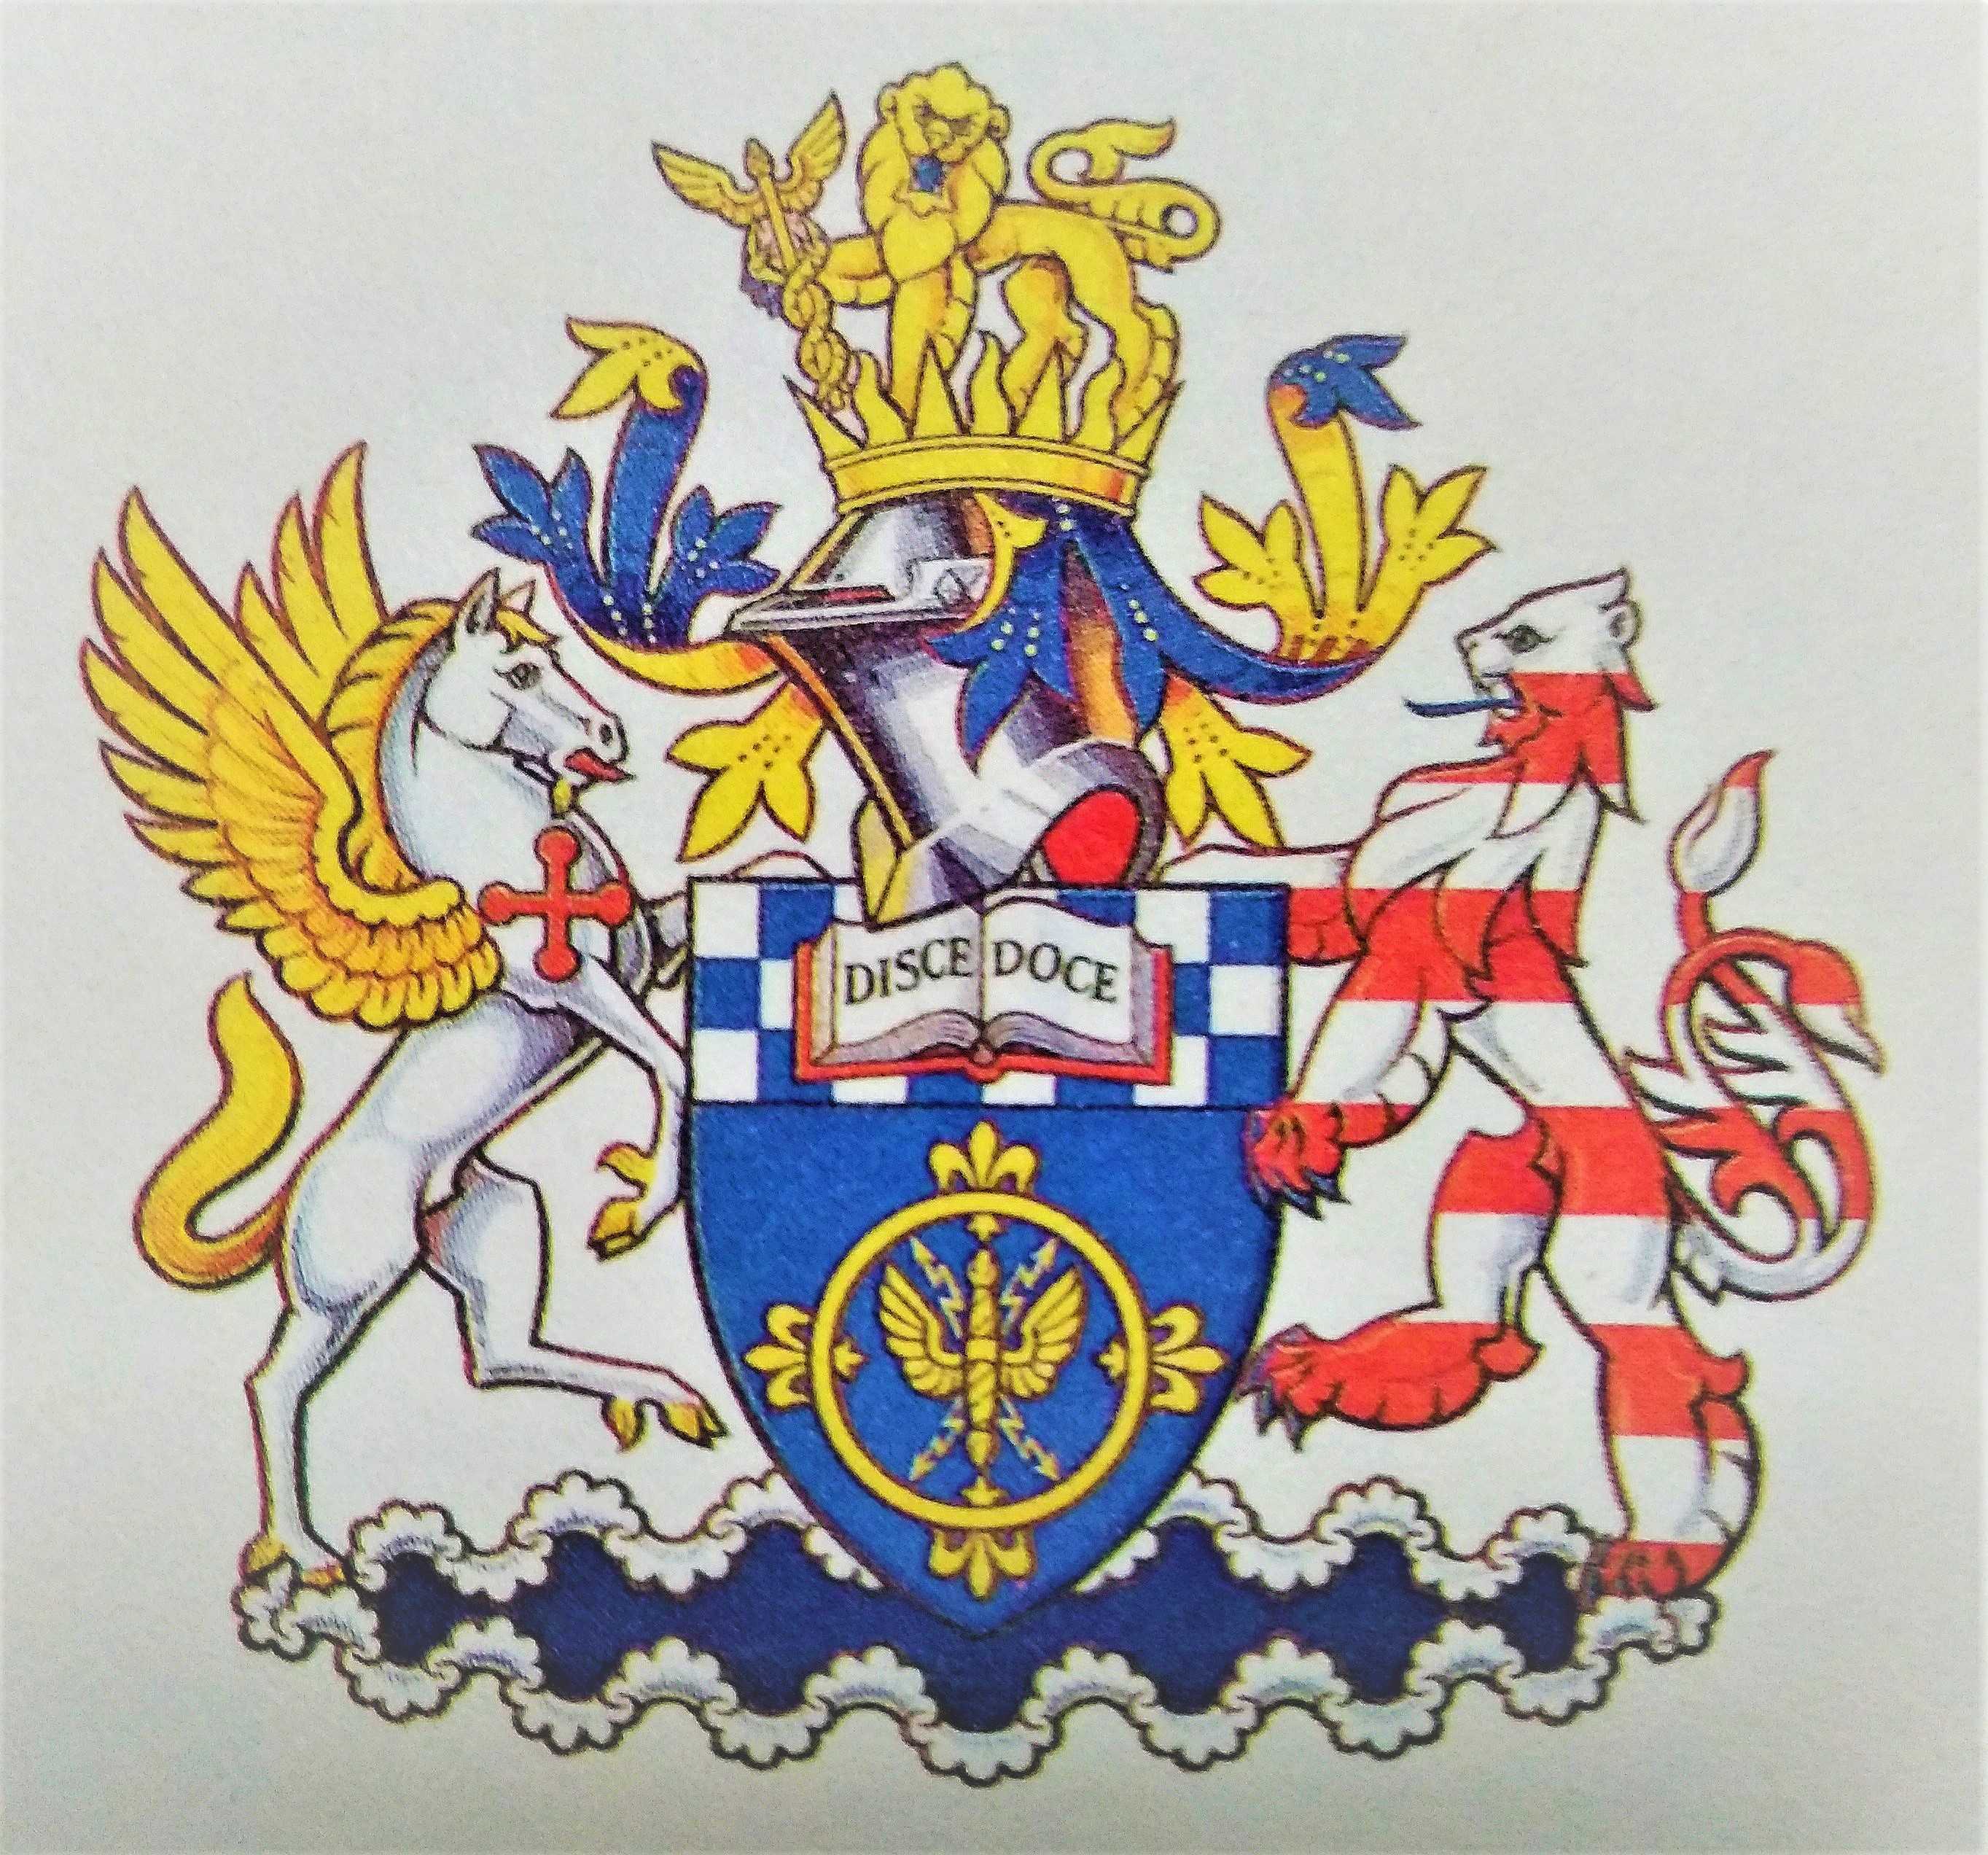 The old crest of IEE, UK